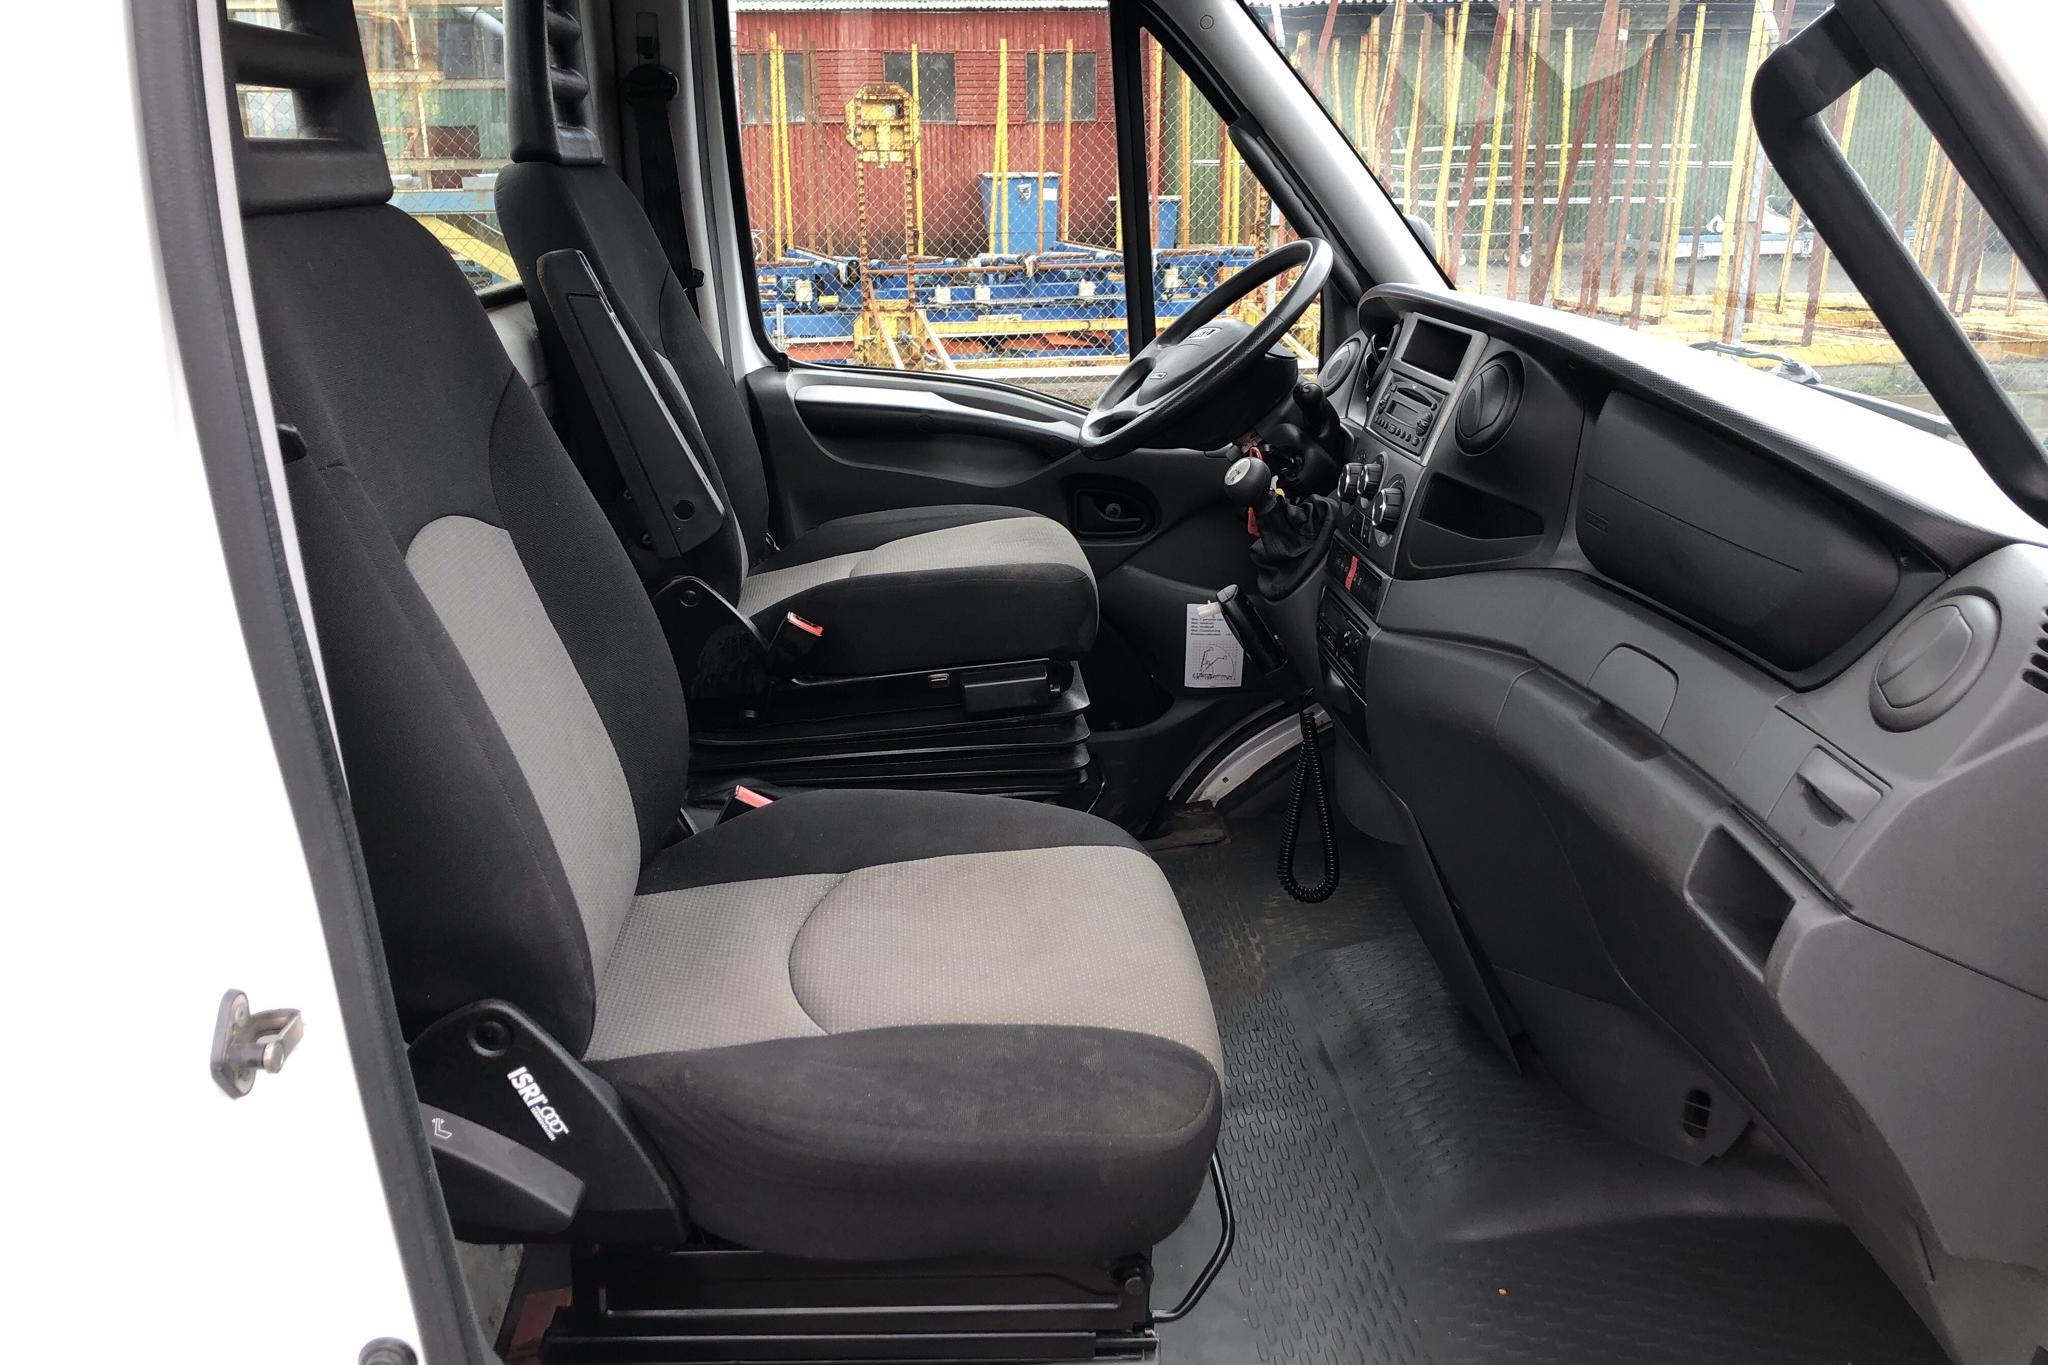 Iveco DAILY 70C - 0 km - Automat - 2013